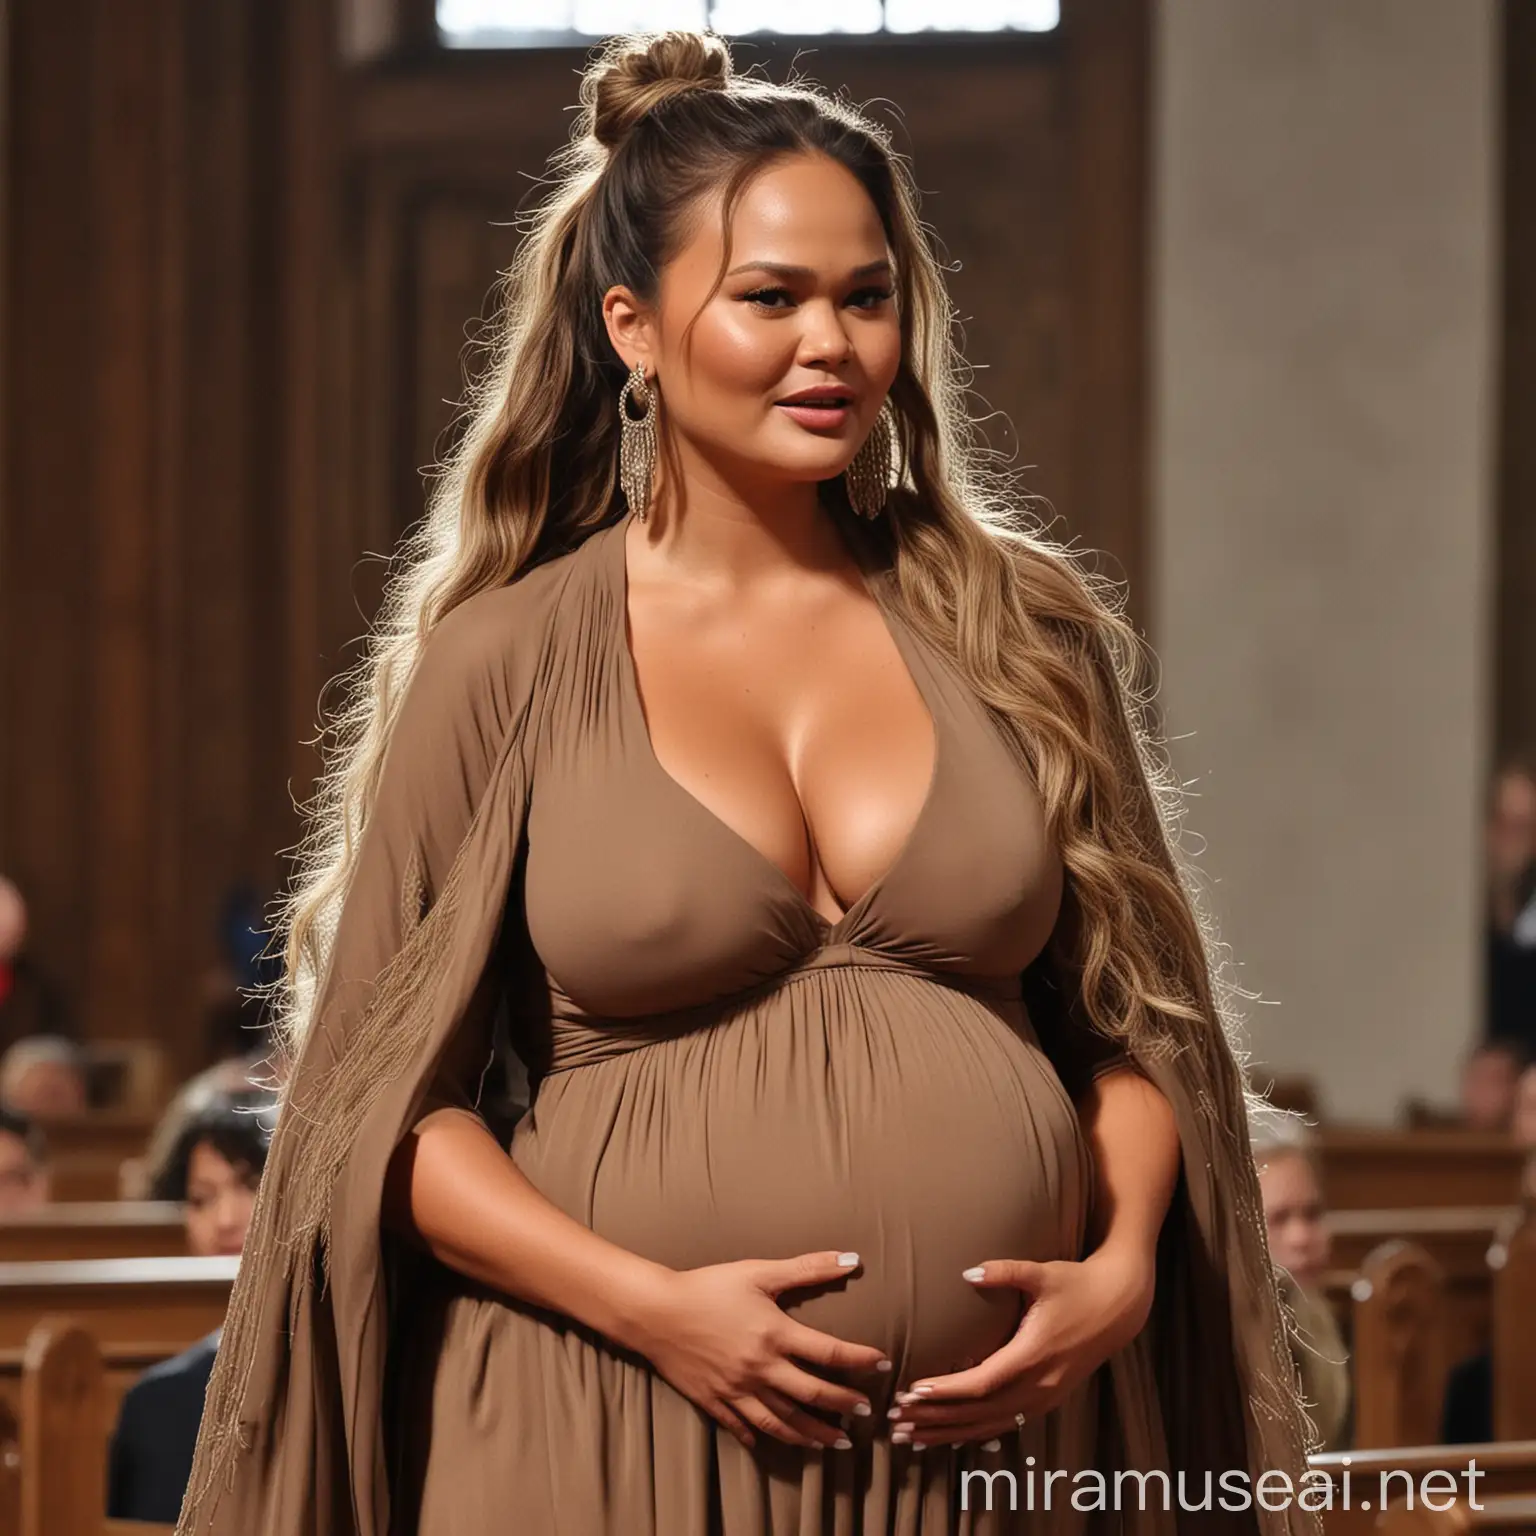 Pregnant Chrissy Teigen with Stunning Cleavage in Church Portrait